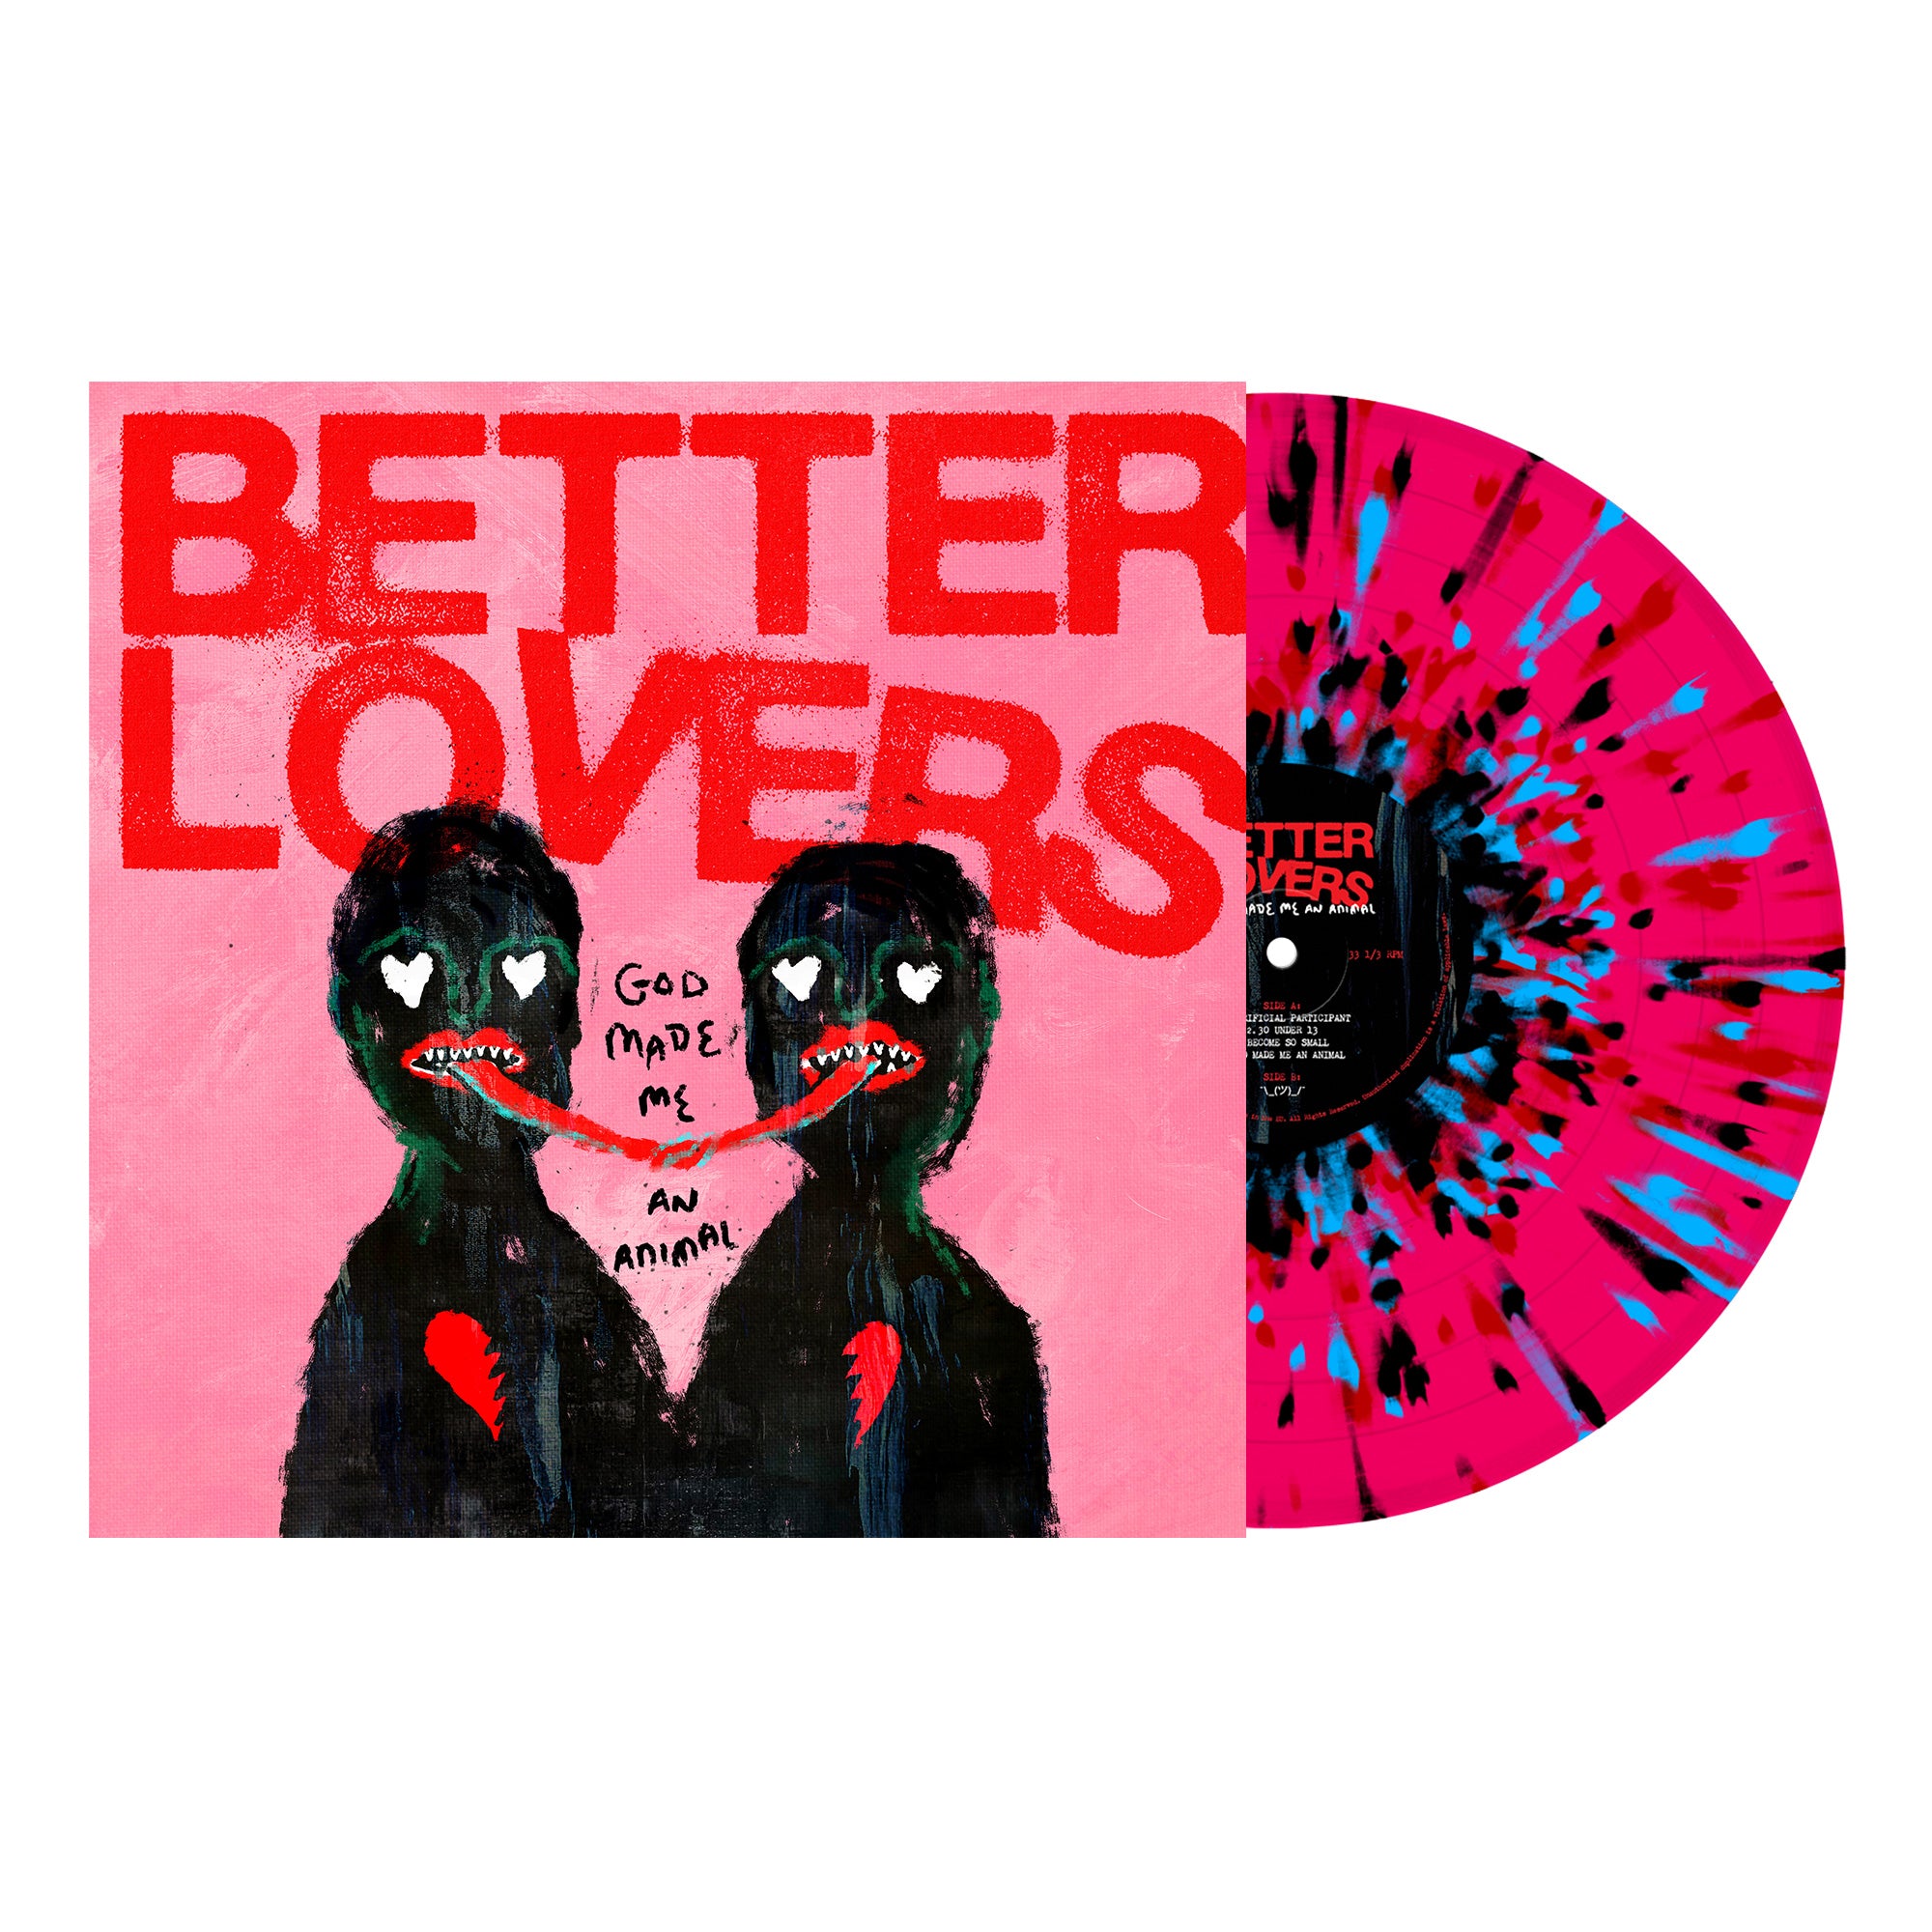 Better Lovers - 'God Made Me An Animal' Pink w/ Red, Turquoise and Black Splatter Vinyl